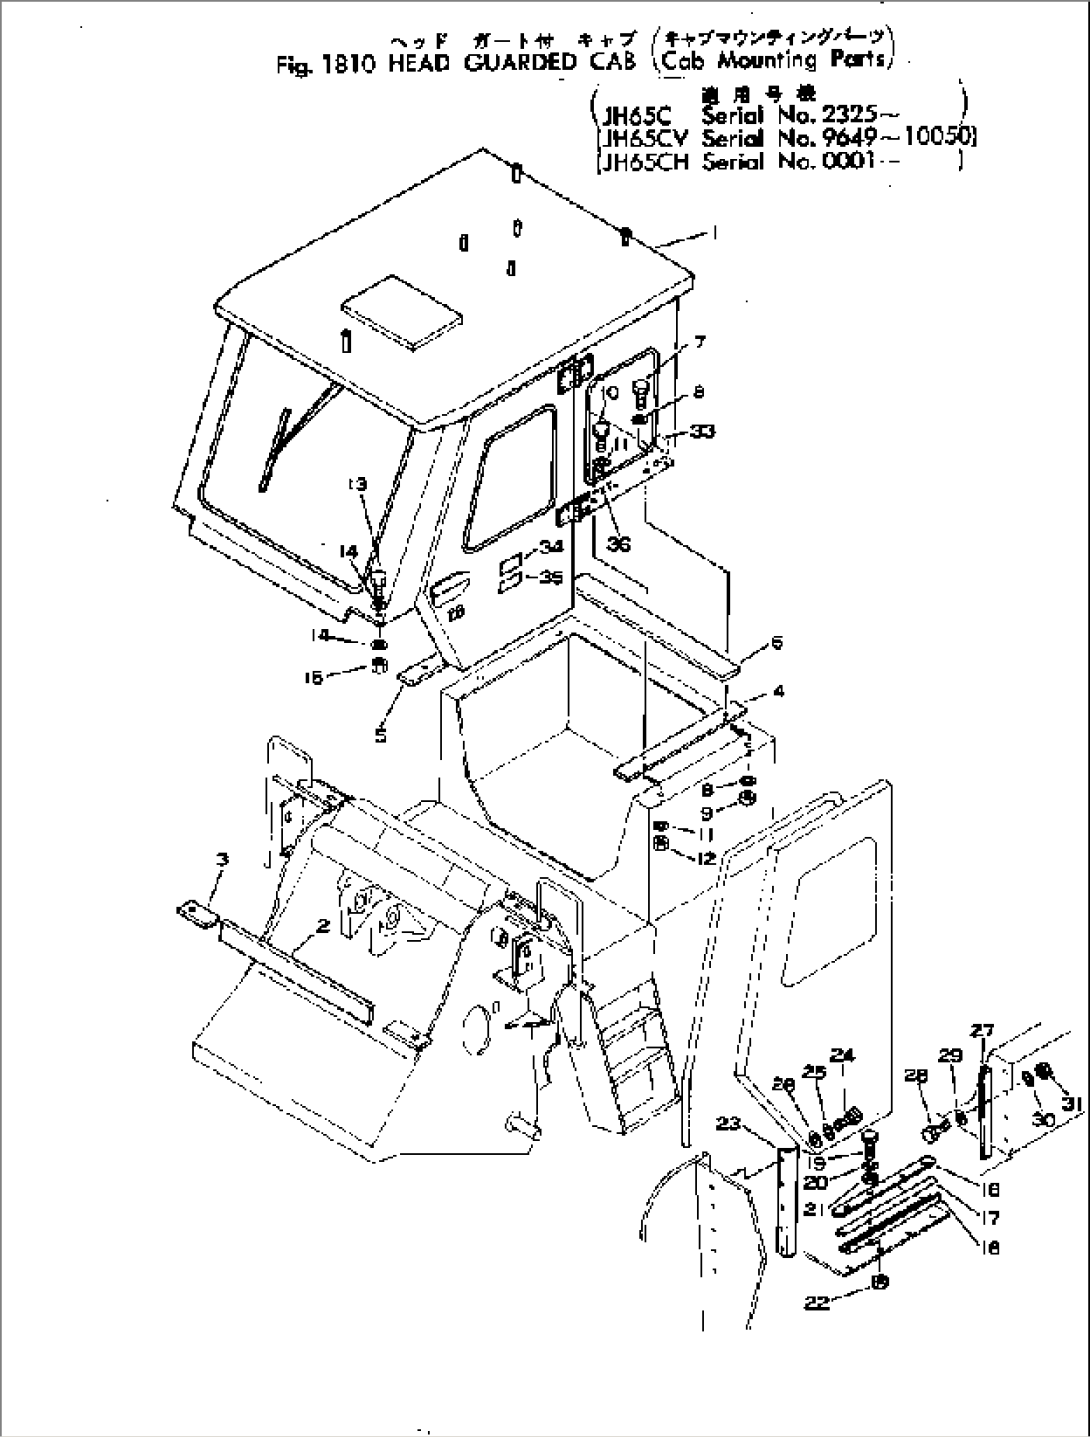 HEAD GUARDED CAB (CAB MOUNTING PARTS)(#3-)